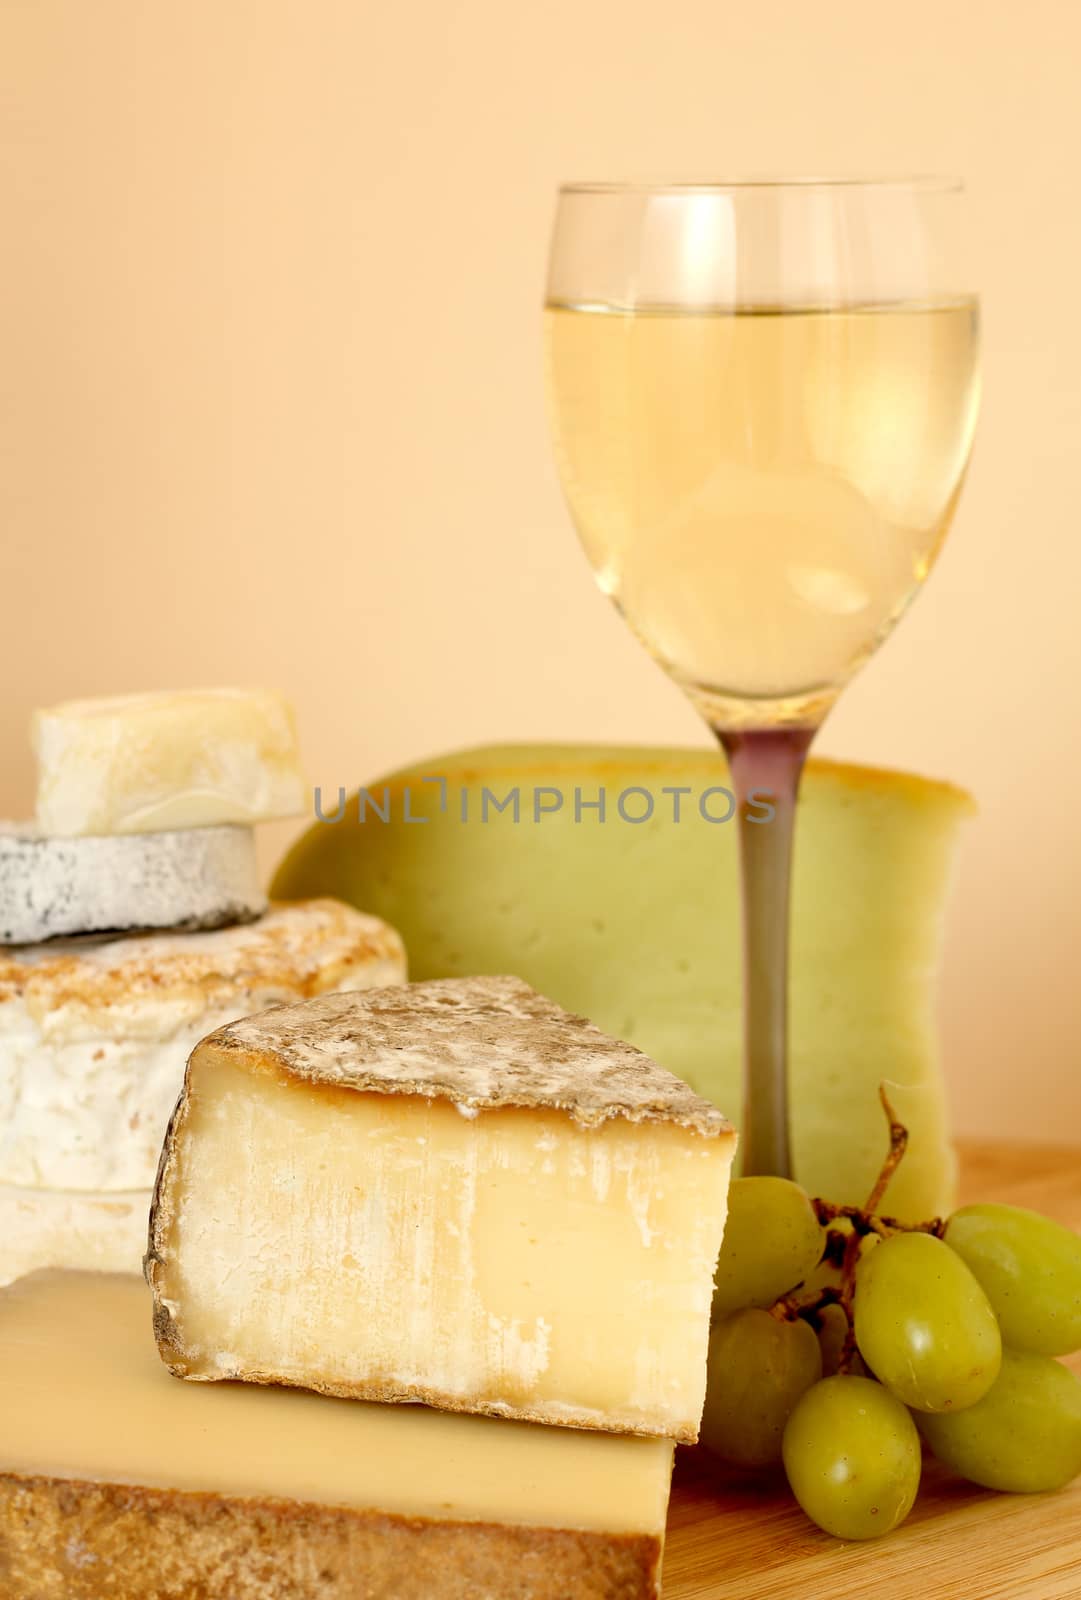 Wine, cheese and grapes by destillat